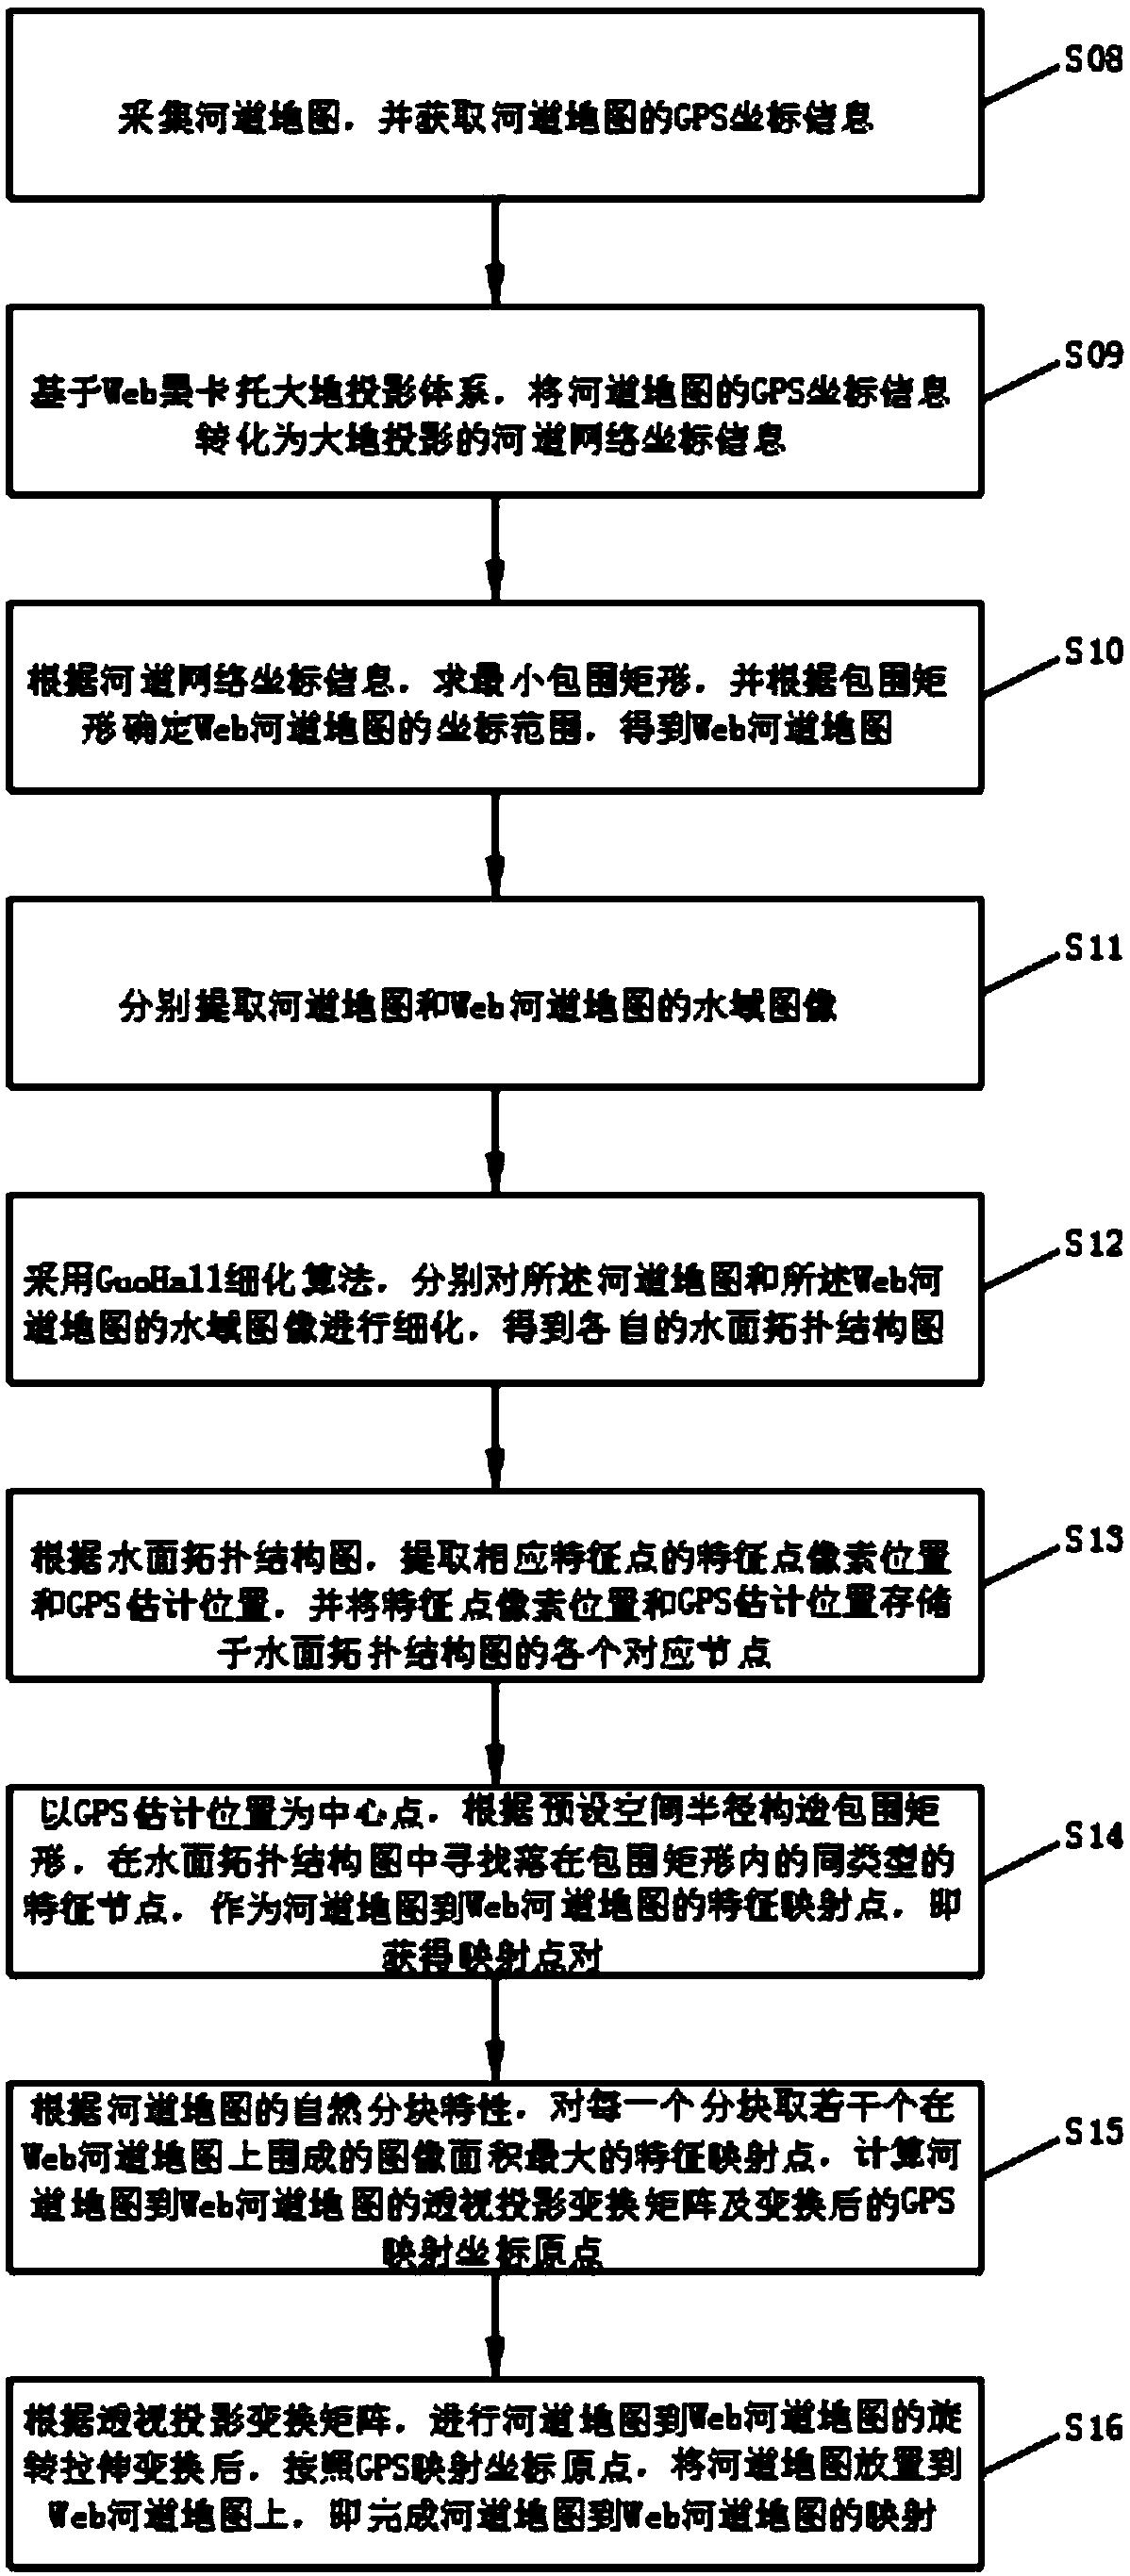 Method and apparatus for mapping river course map to web map